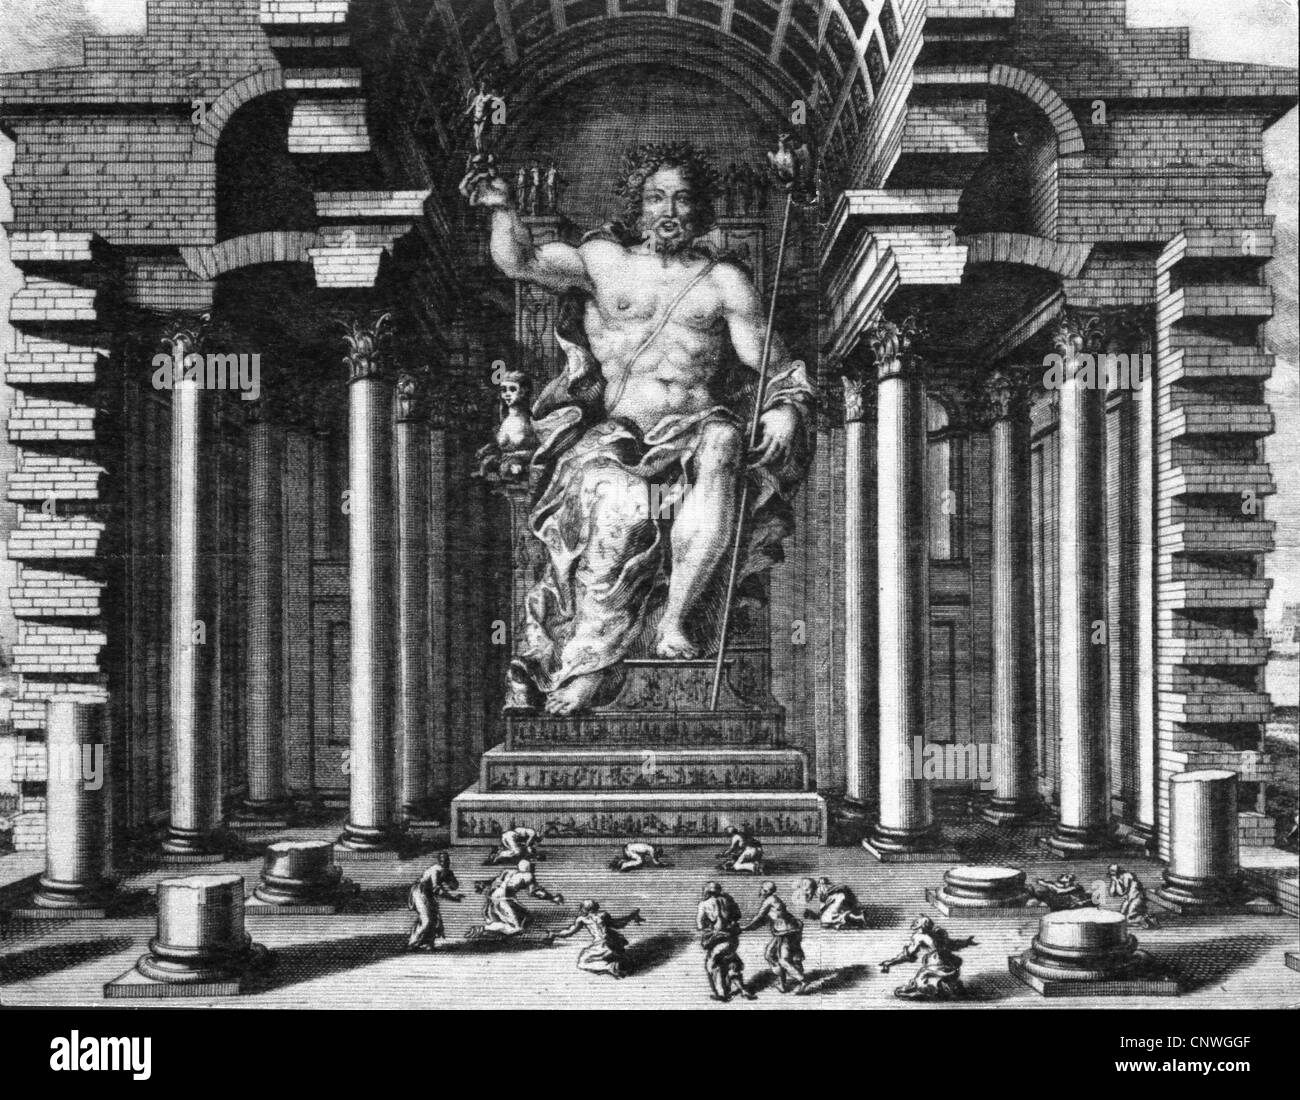 Zeus (Latin: Jupiter), Greek 'divine king', leader of gods, god of sky and thunder, temple of Zeus, Statue of Zeus at Olympia (reconstruction), wood engraving, 19th century, half length, Stock Photo